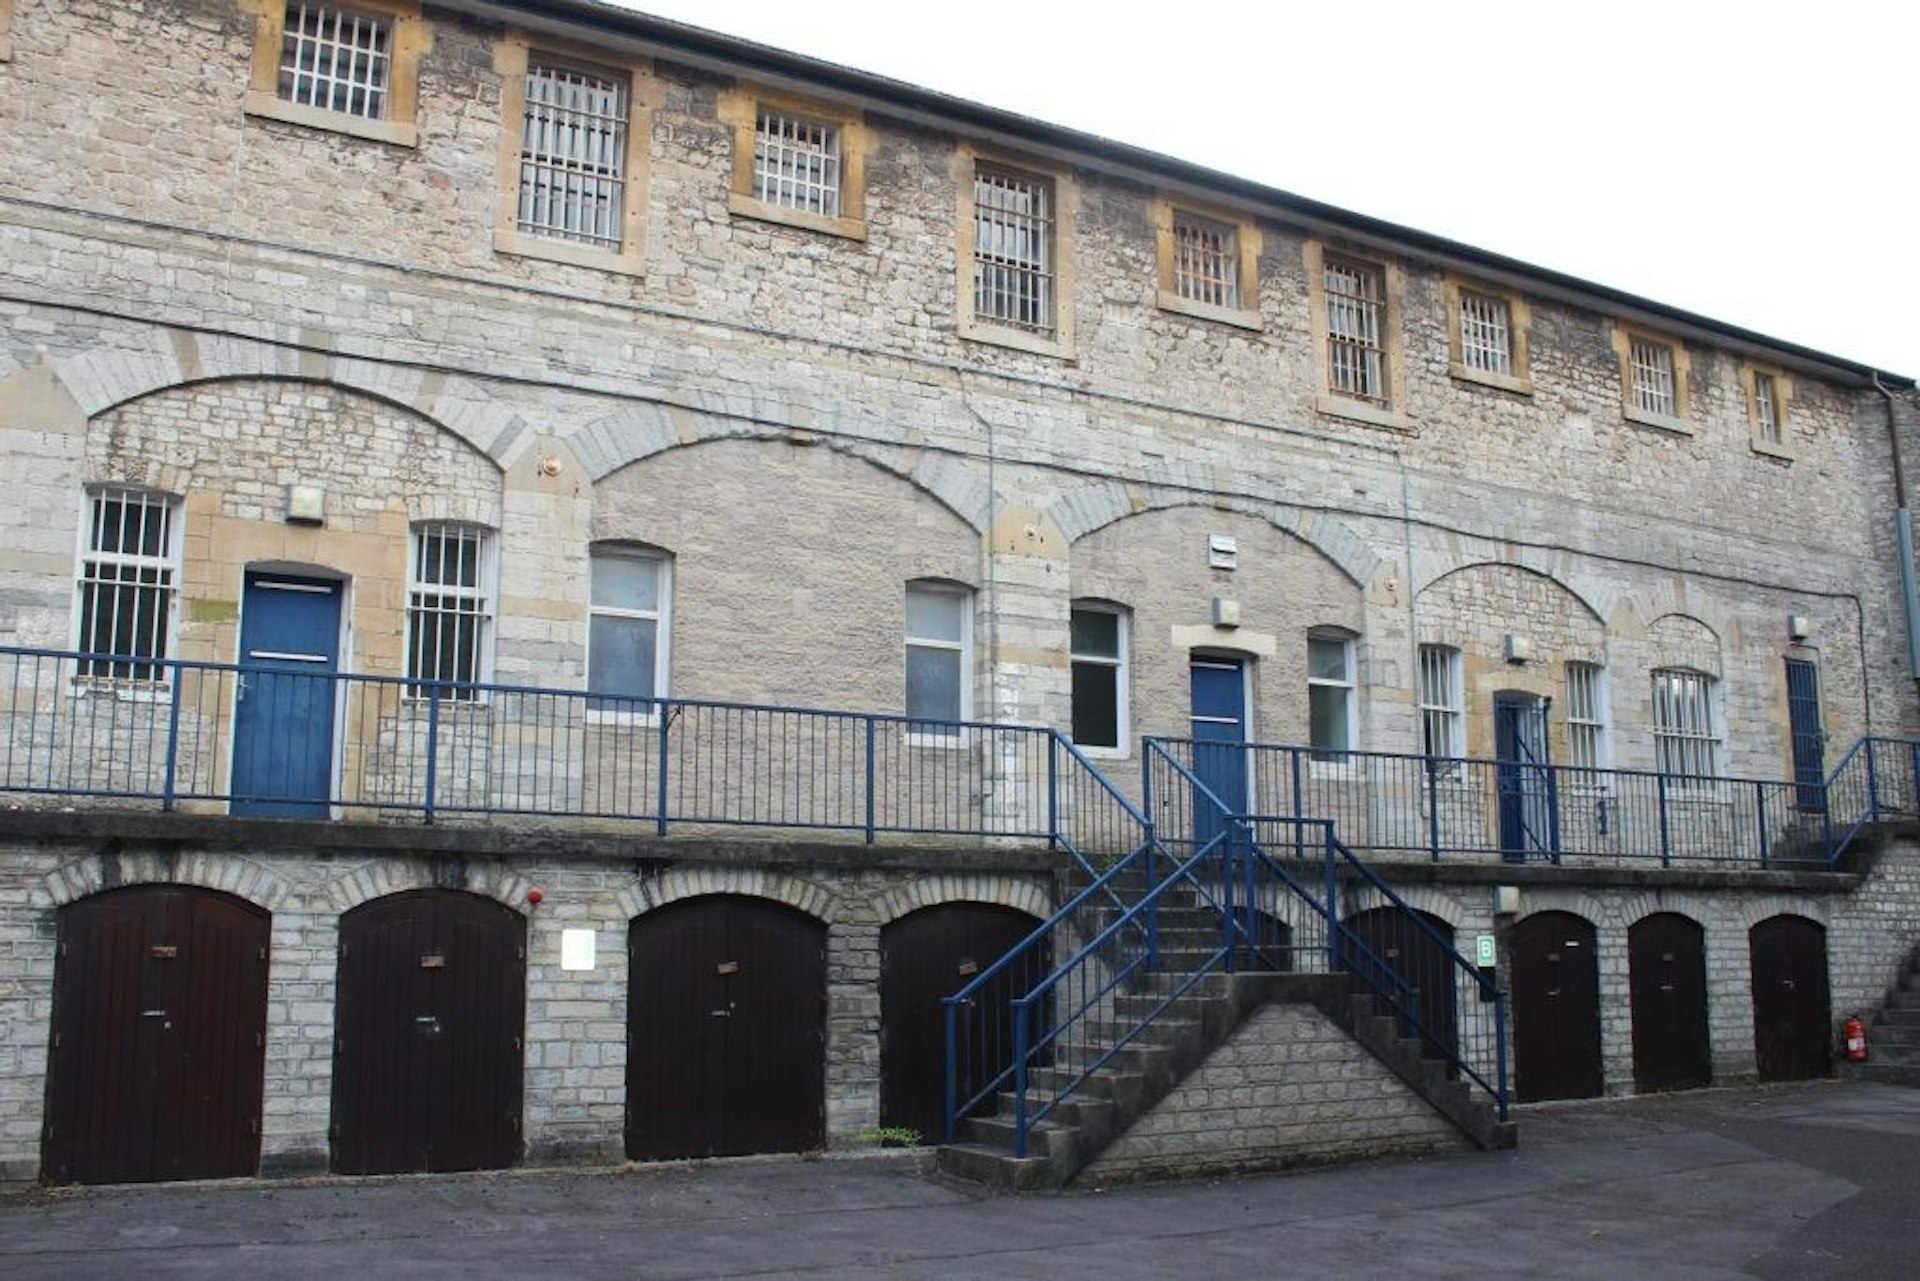 The blank exterior of the hotel, which was once a prison.